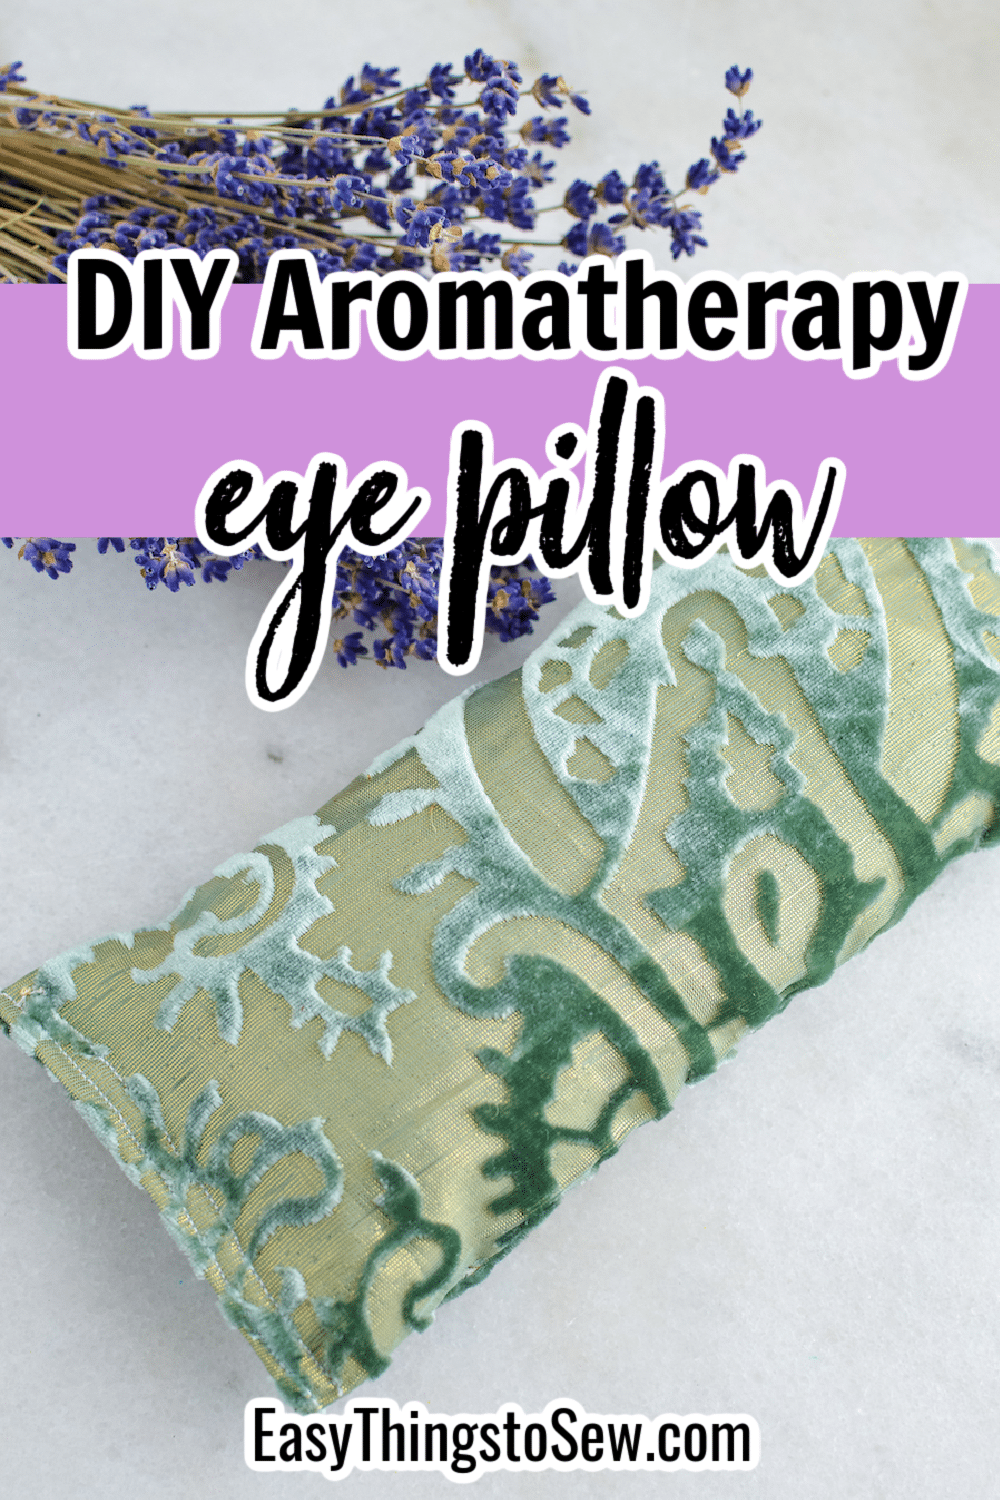 Lavender DIY eye pillow with decorative pattern, next to dried lavender on a surface.